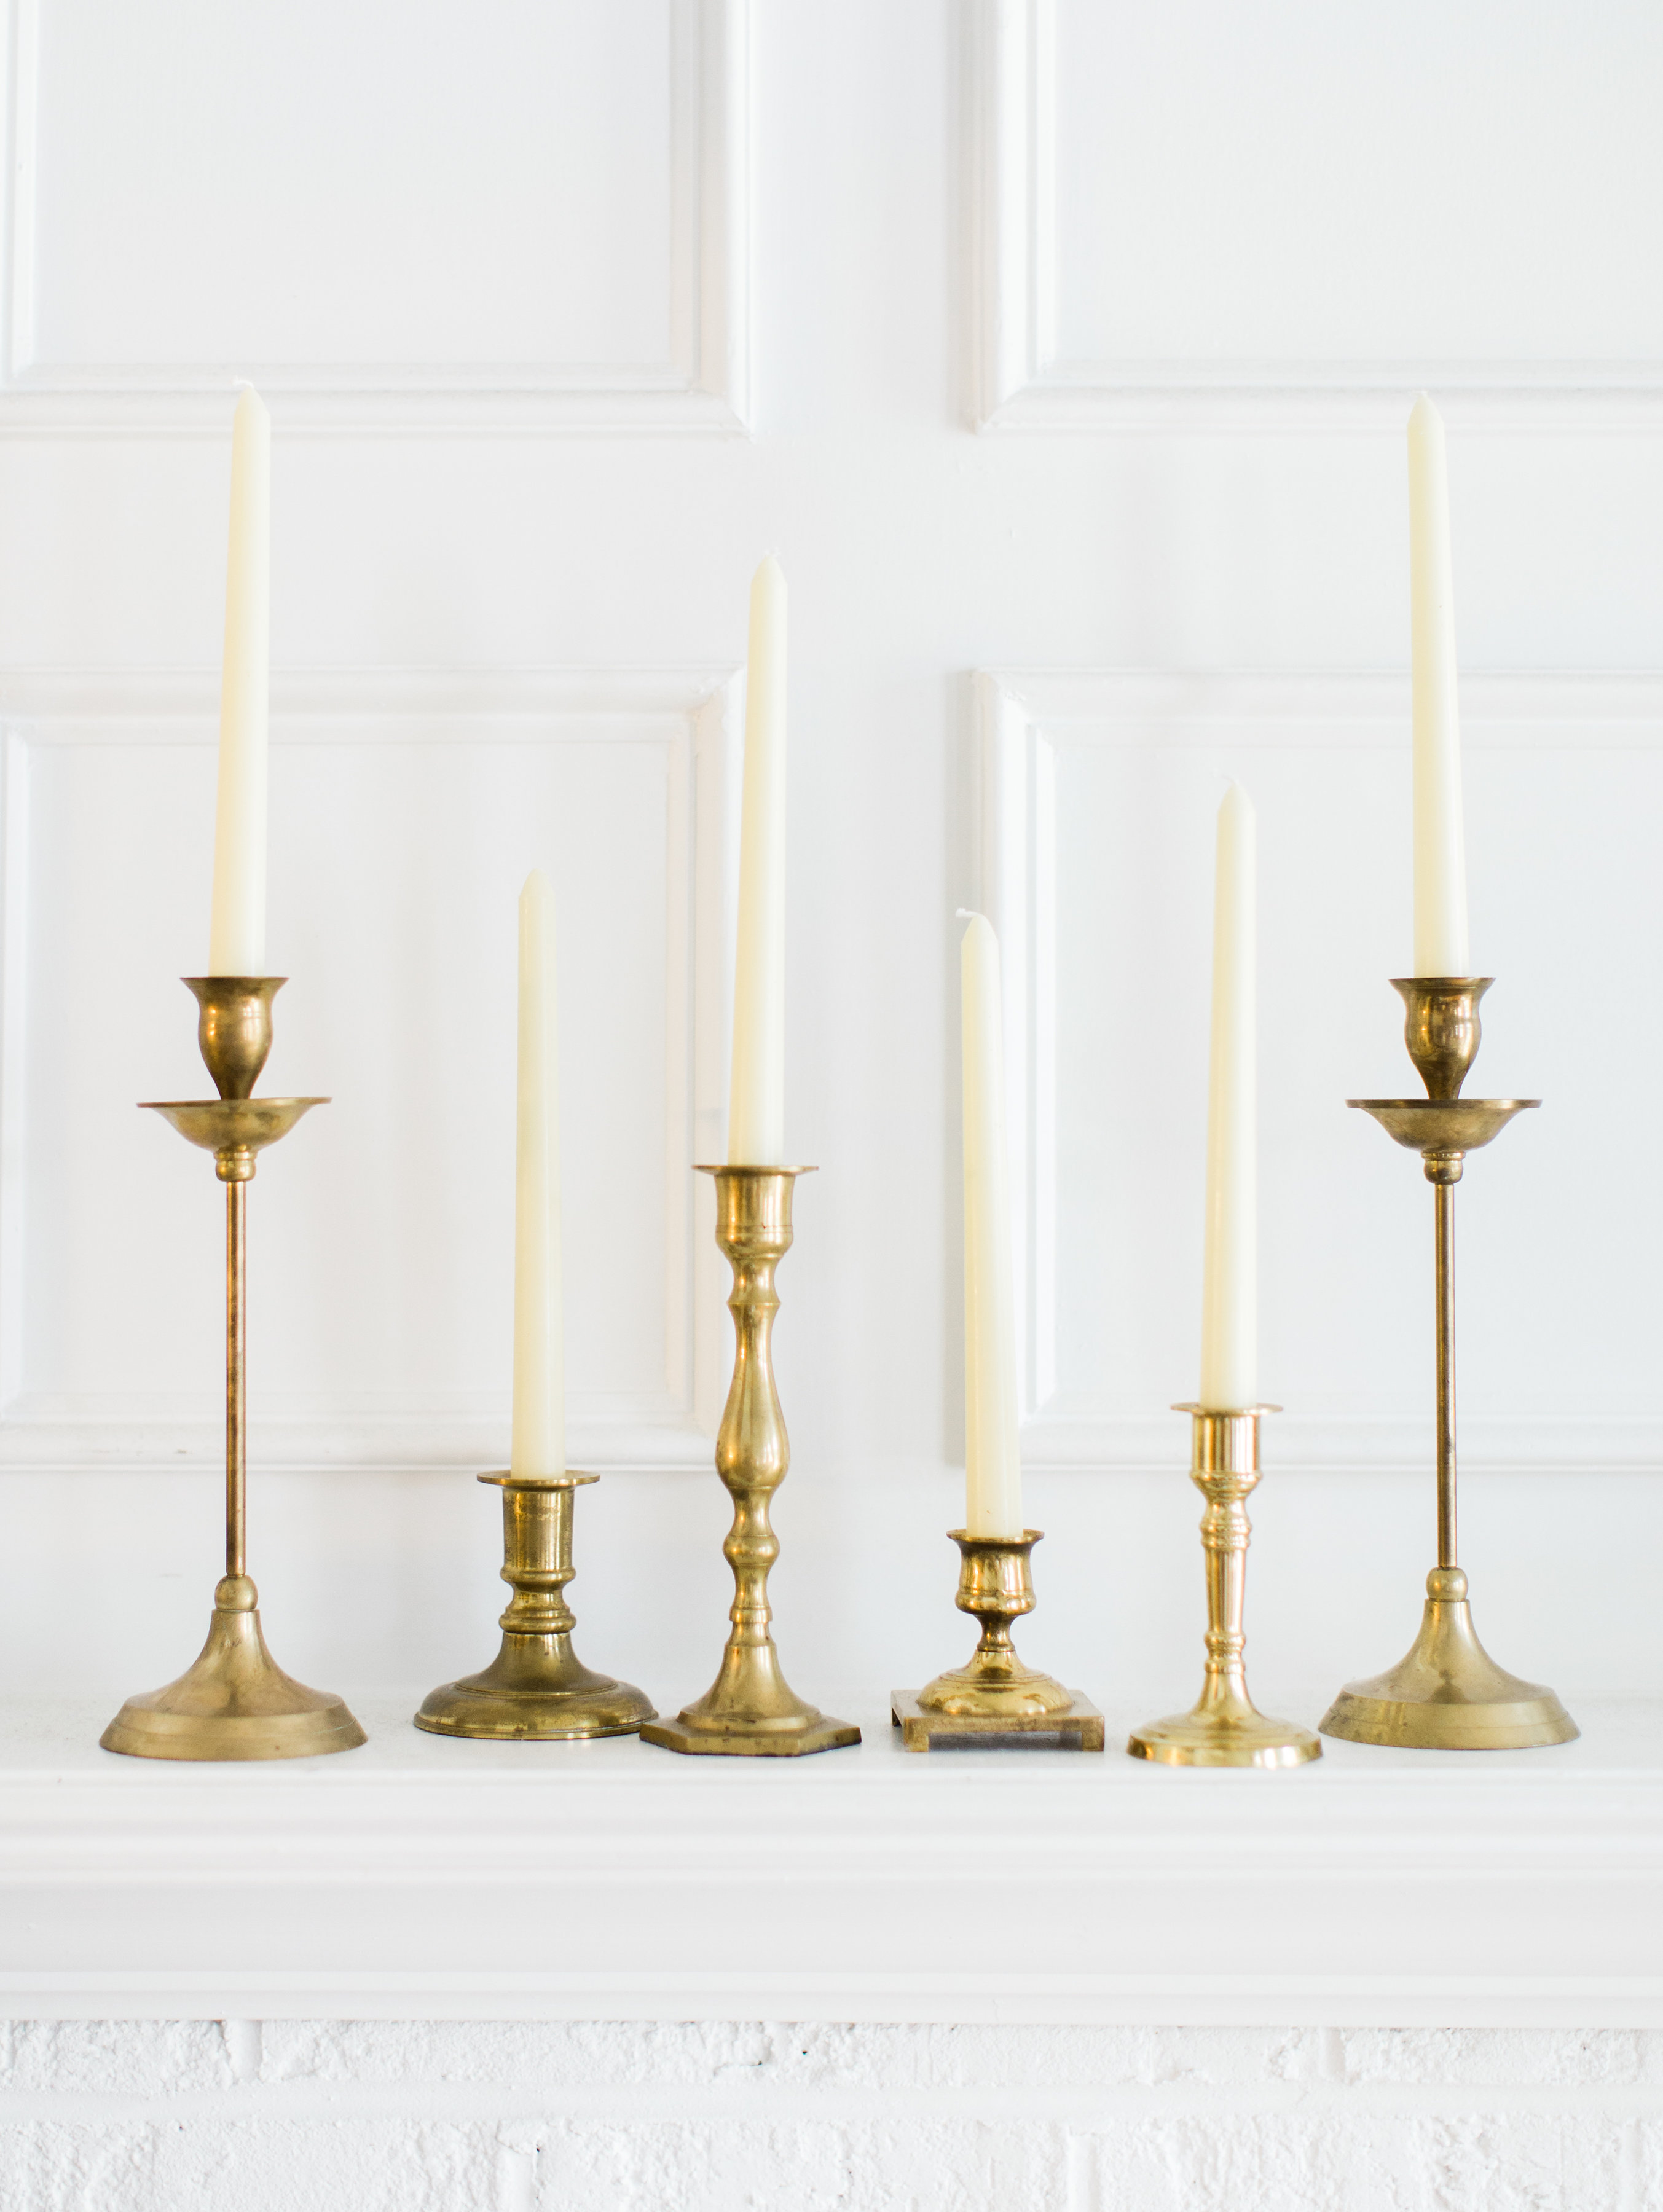 Lifestyle and Home blogger Lexi of Glitter, Inc. shares an awesome trick for finding great vintage home décor items - plus, the best places for thrifting - including how she stumbled upon these vintage brass candlestick holders for less than a dollar. Click through for the details. #vintage #brasscandlesticks #brasscandles #brasscandleholders #thrifting | glitterinc.com | @glitterinc